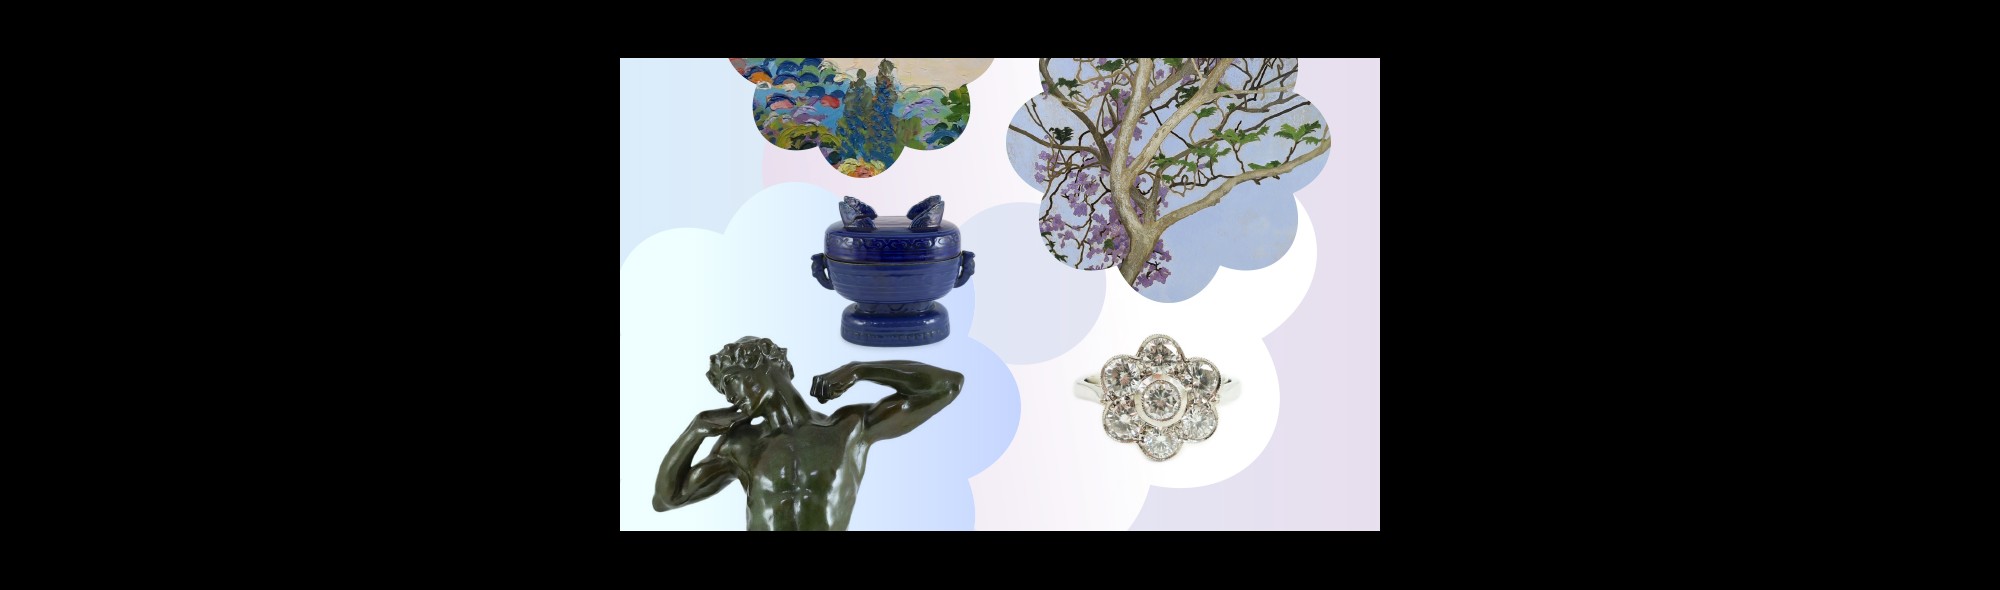 Fred Yates, Figures on a woodland path, Cressida Campbell, Jacaranda in full blossom, Platinum and seven stone diamond ring, After Lord Frederick Leighton, bronze, The Sluggard, Chinese Imperial blue glazed ritual offering vessel and cover